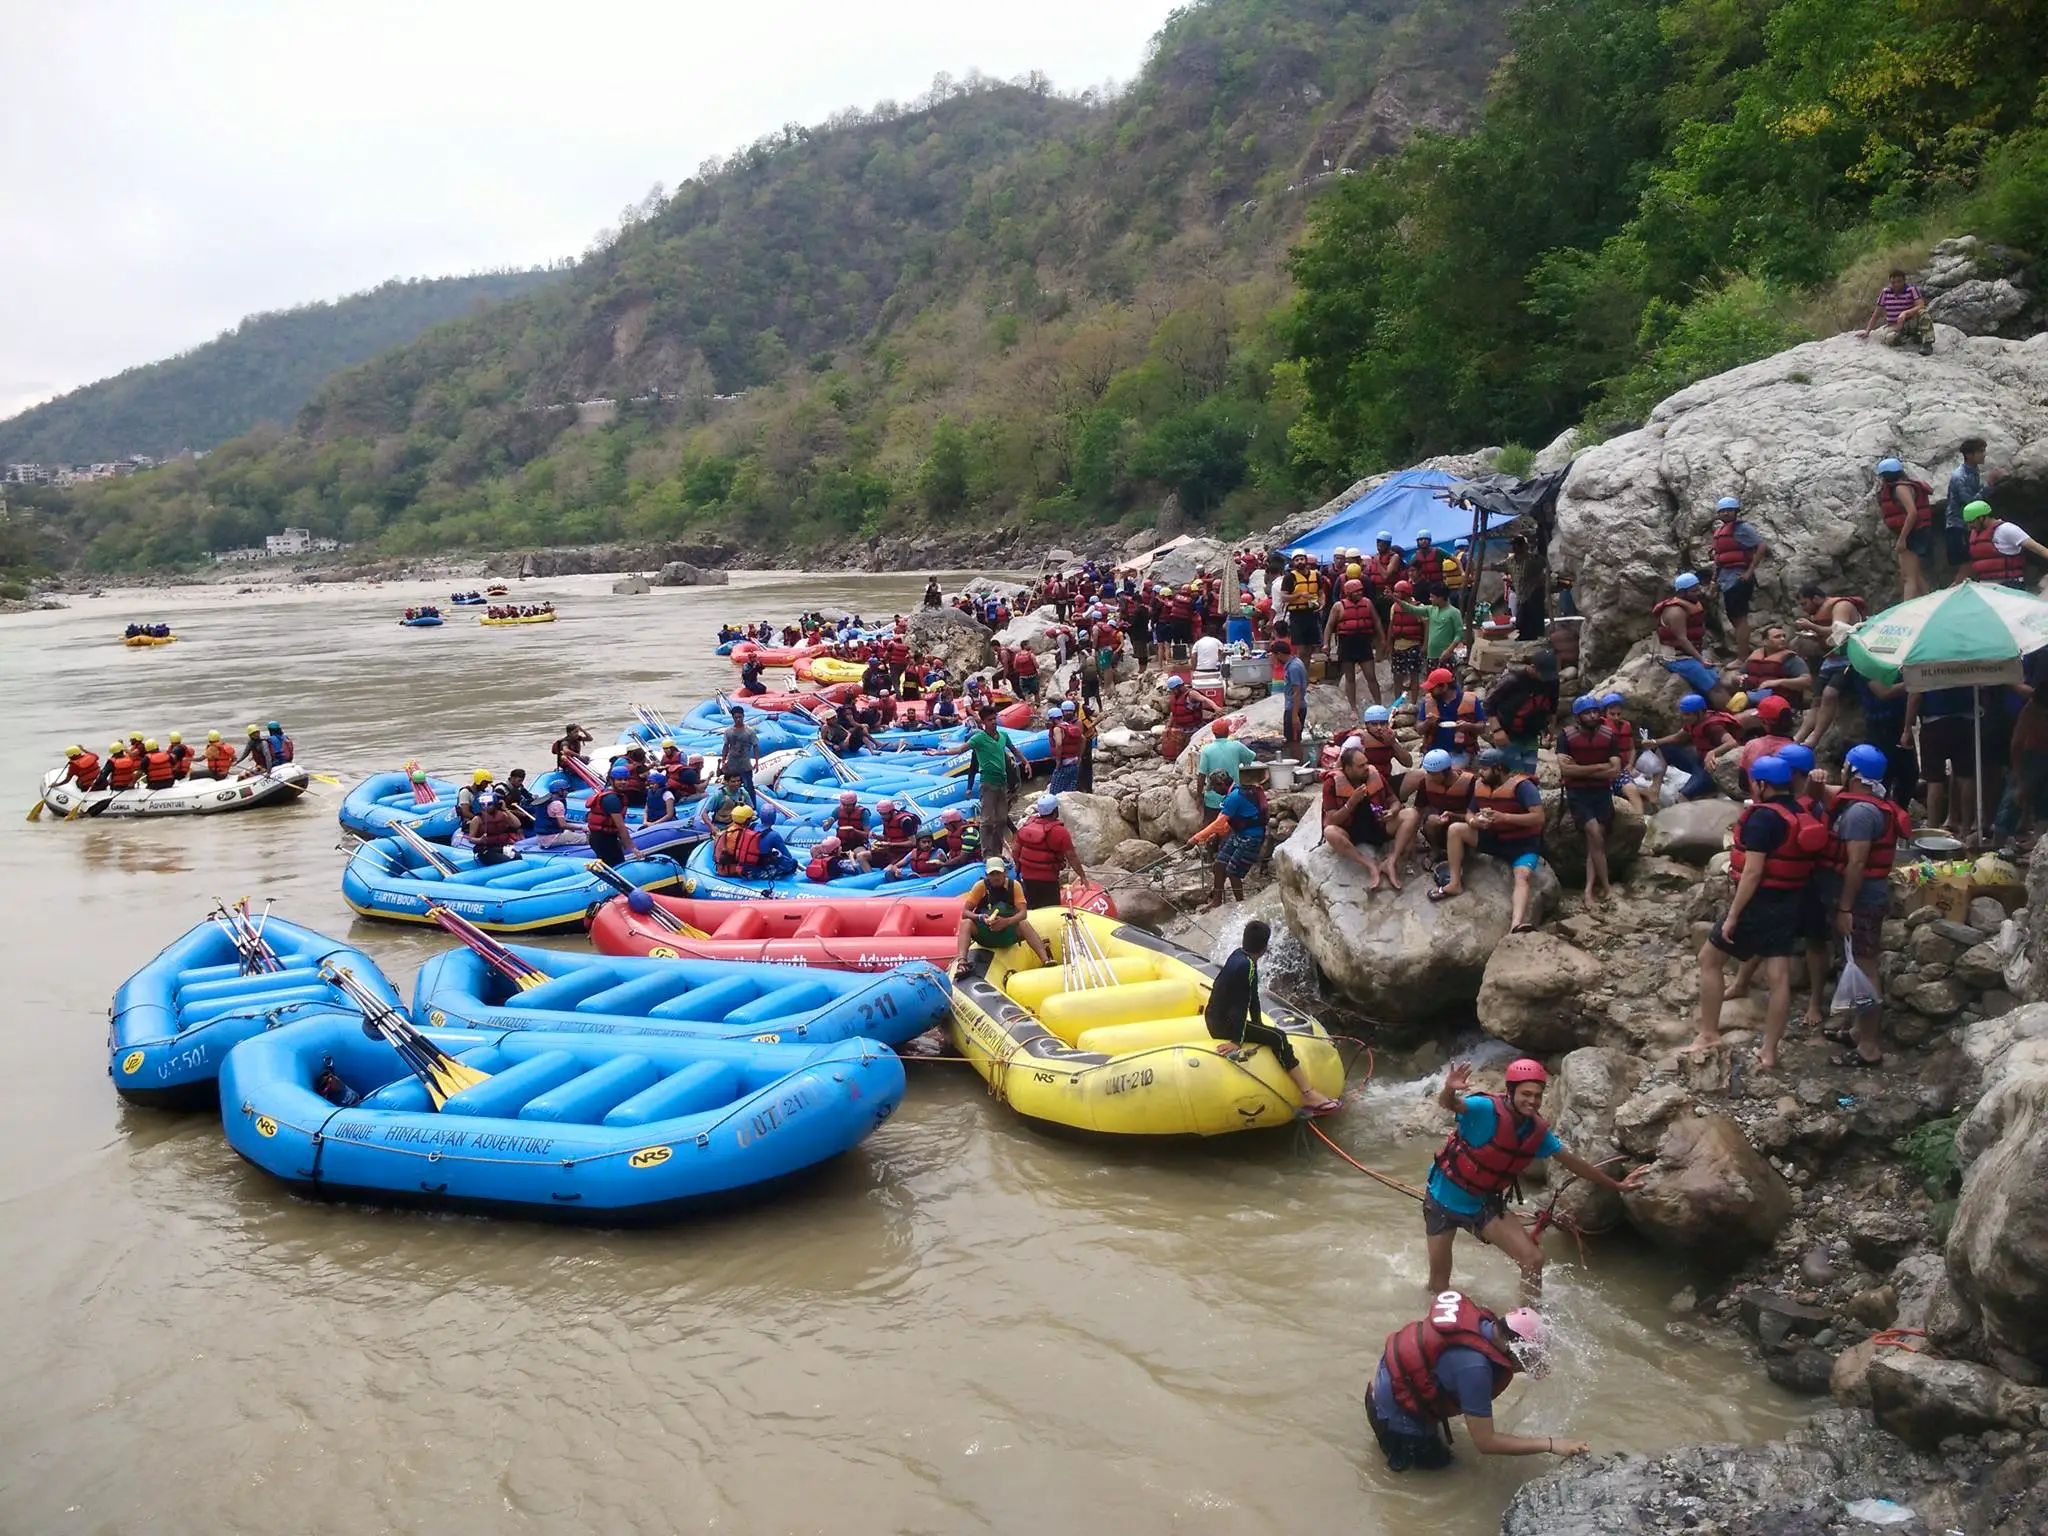 River rating in rishikesh,things to do in rishikesh, tourist places in rishikesh, things to do at rishikesh, places to visit in rishikesh, visiting places in rishikesh, places to visit at rishikesh, rishikesh tourist places, Rishikesh Rafting